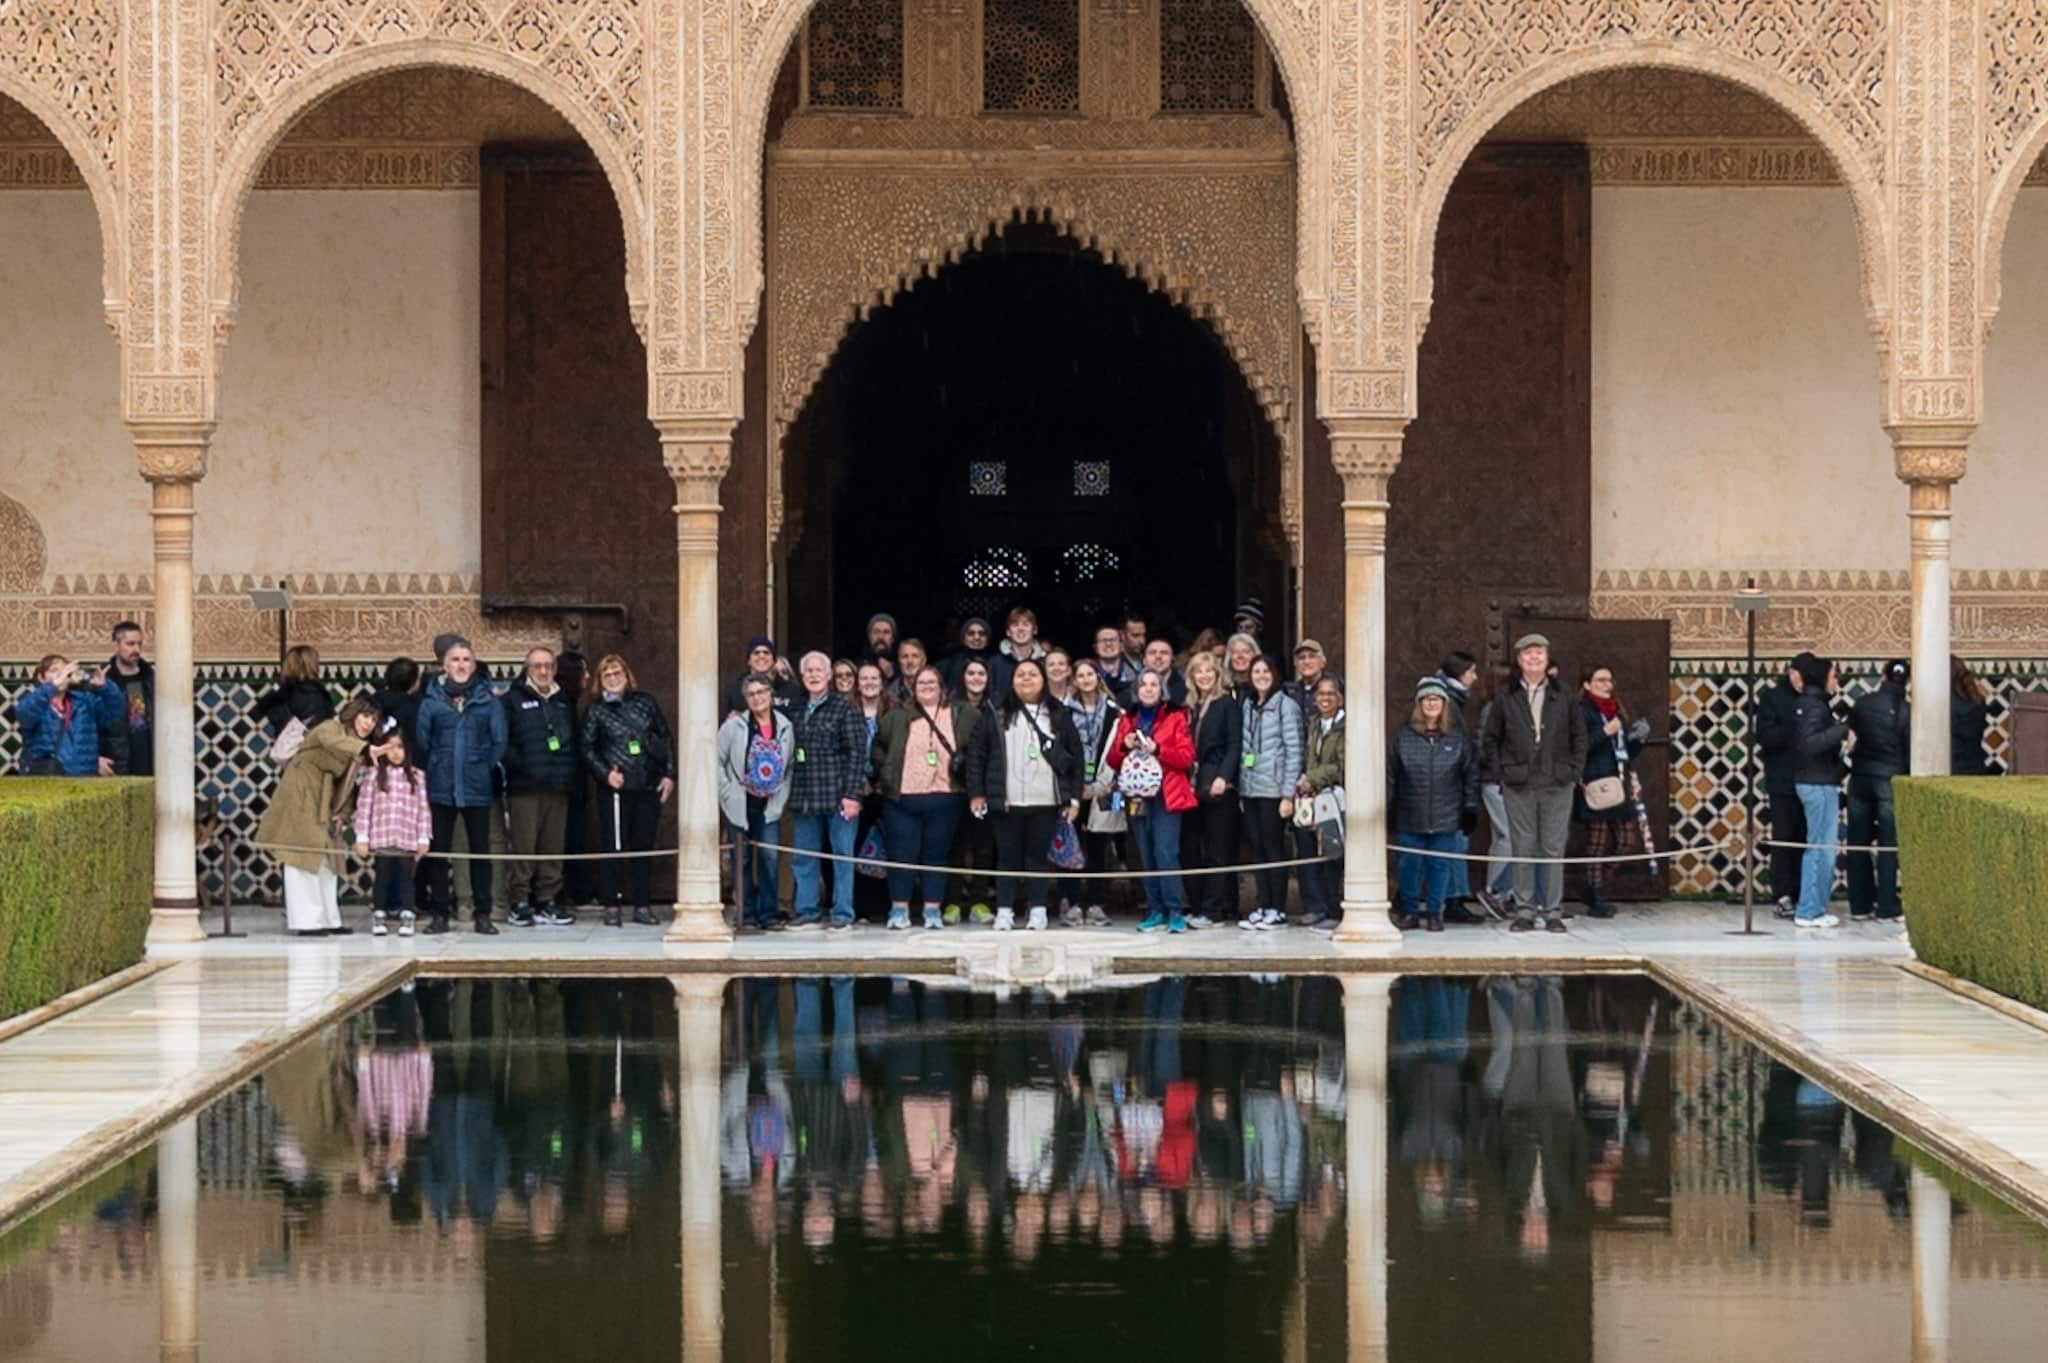 Alandis Students at the Alhambra in Granada, Spain